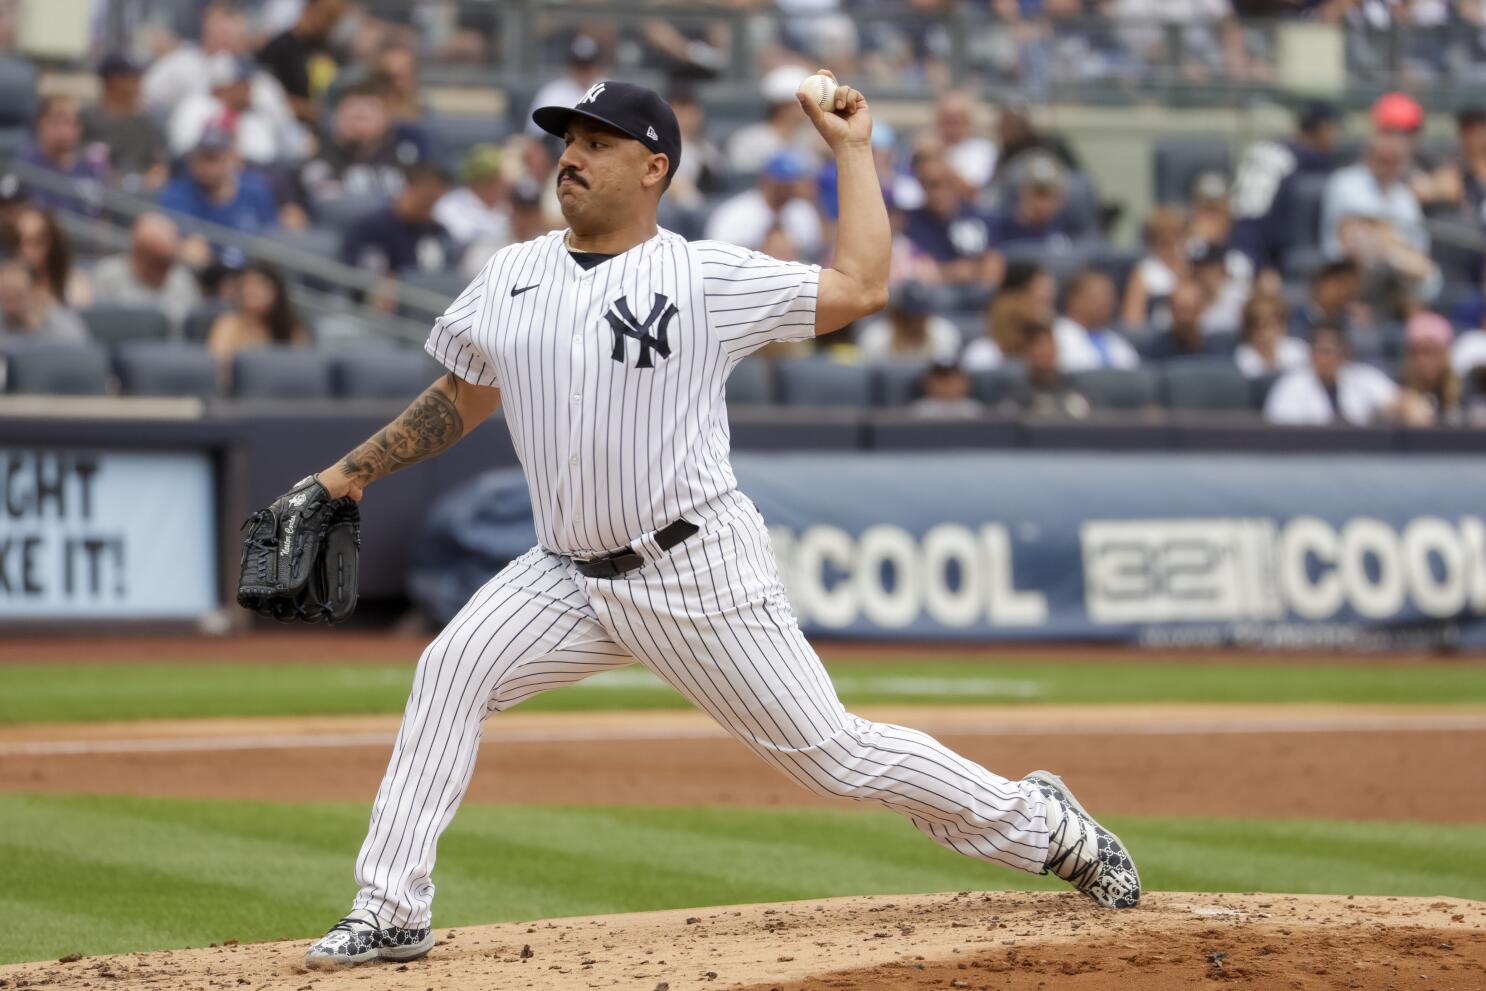 Yankees put All-Star Cortes on injured list for groin strain - The